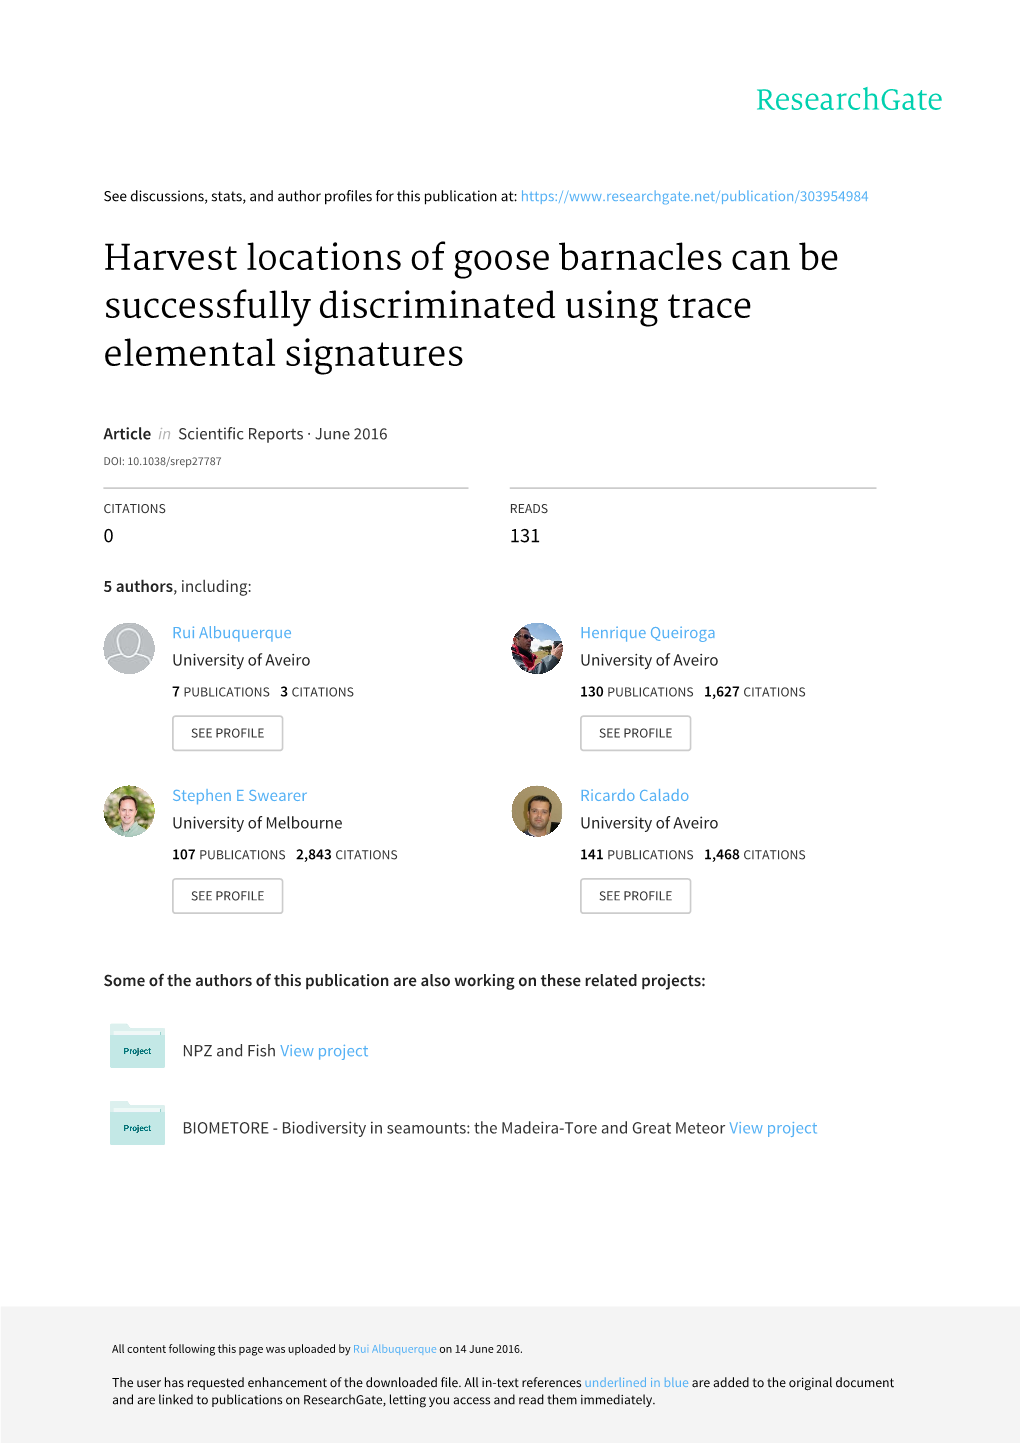 Harvest Locations of Goose Barnacles Can Be Successfully Discriminated Using Trace Elemental Signatures